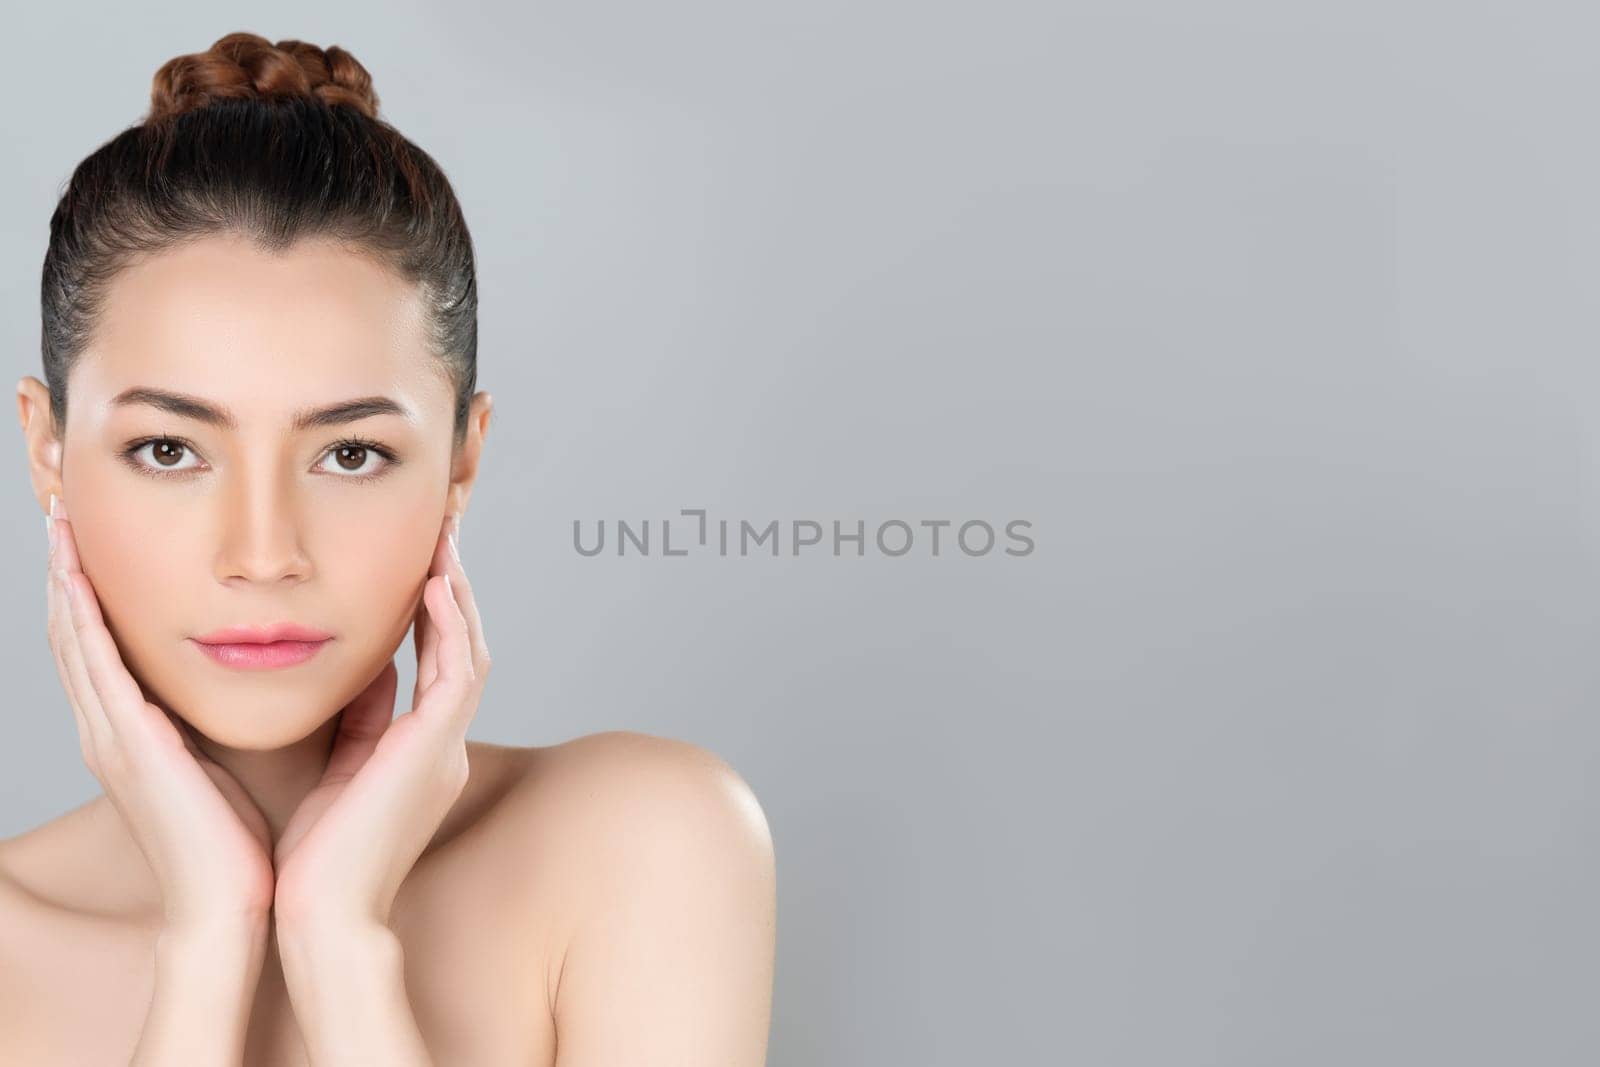 Glamorous woman portrait with perfect smooth pure clean skin with soft cosmetic makeup in isolated background. Beauty hand gesture with expressive facial expression for skincare product or spa ad.